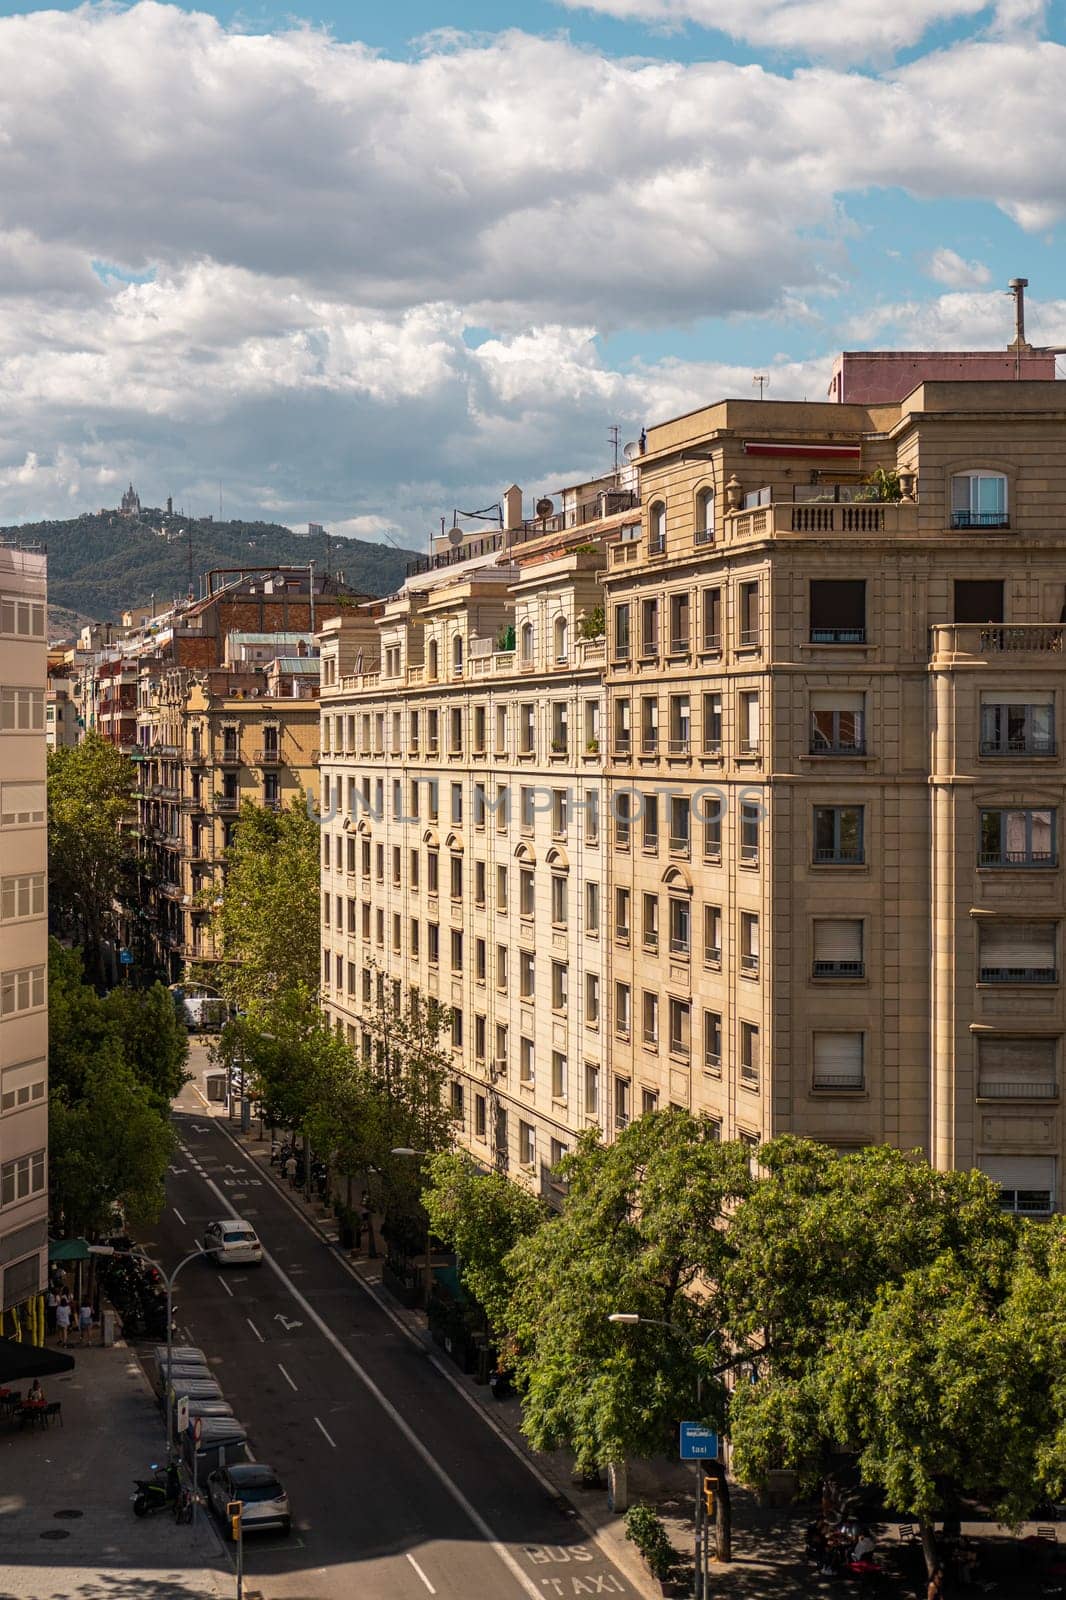 View of Urban Barcelona with Historical Buildings and Tree-Lined Streets by apavlin